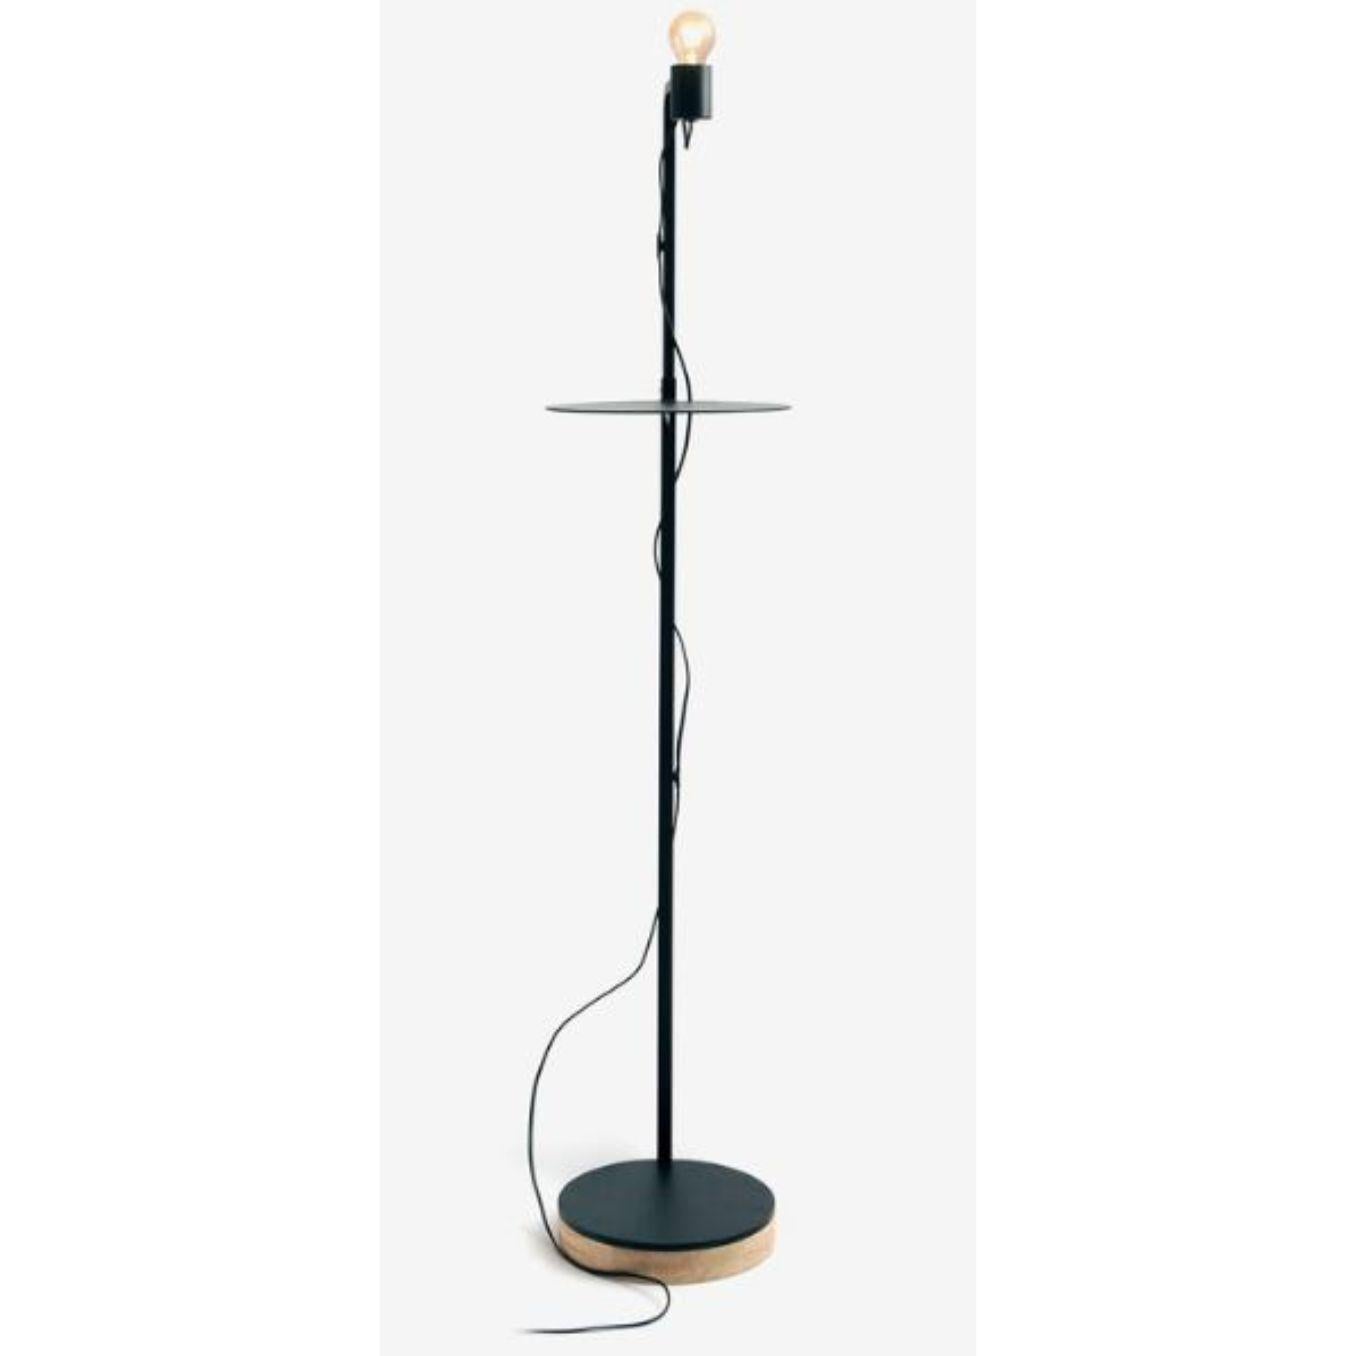 Other Grafit Floor Lamp by Radar For Sale